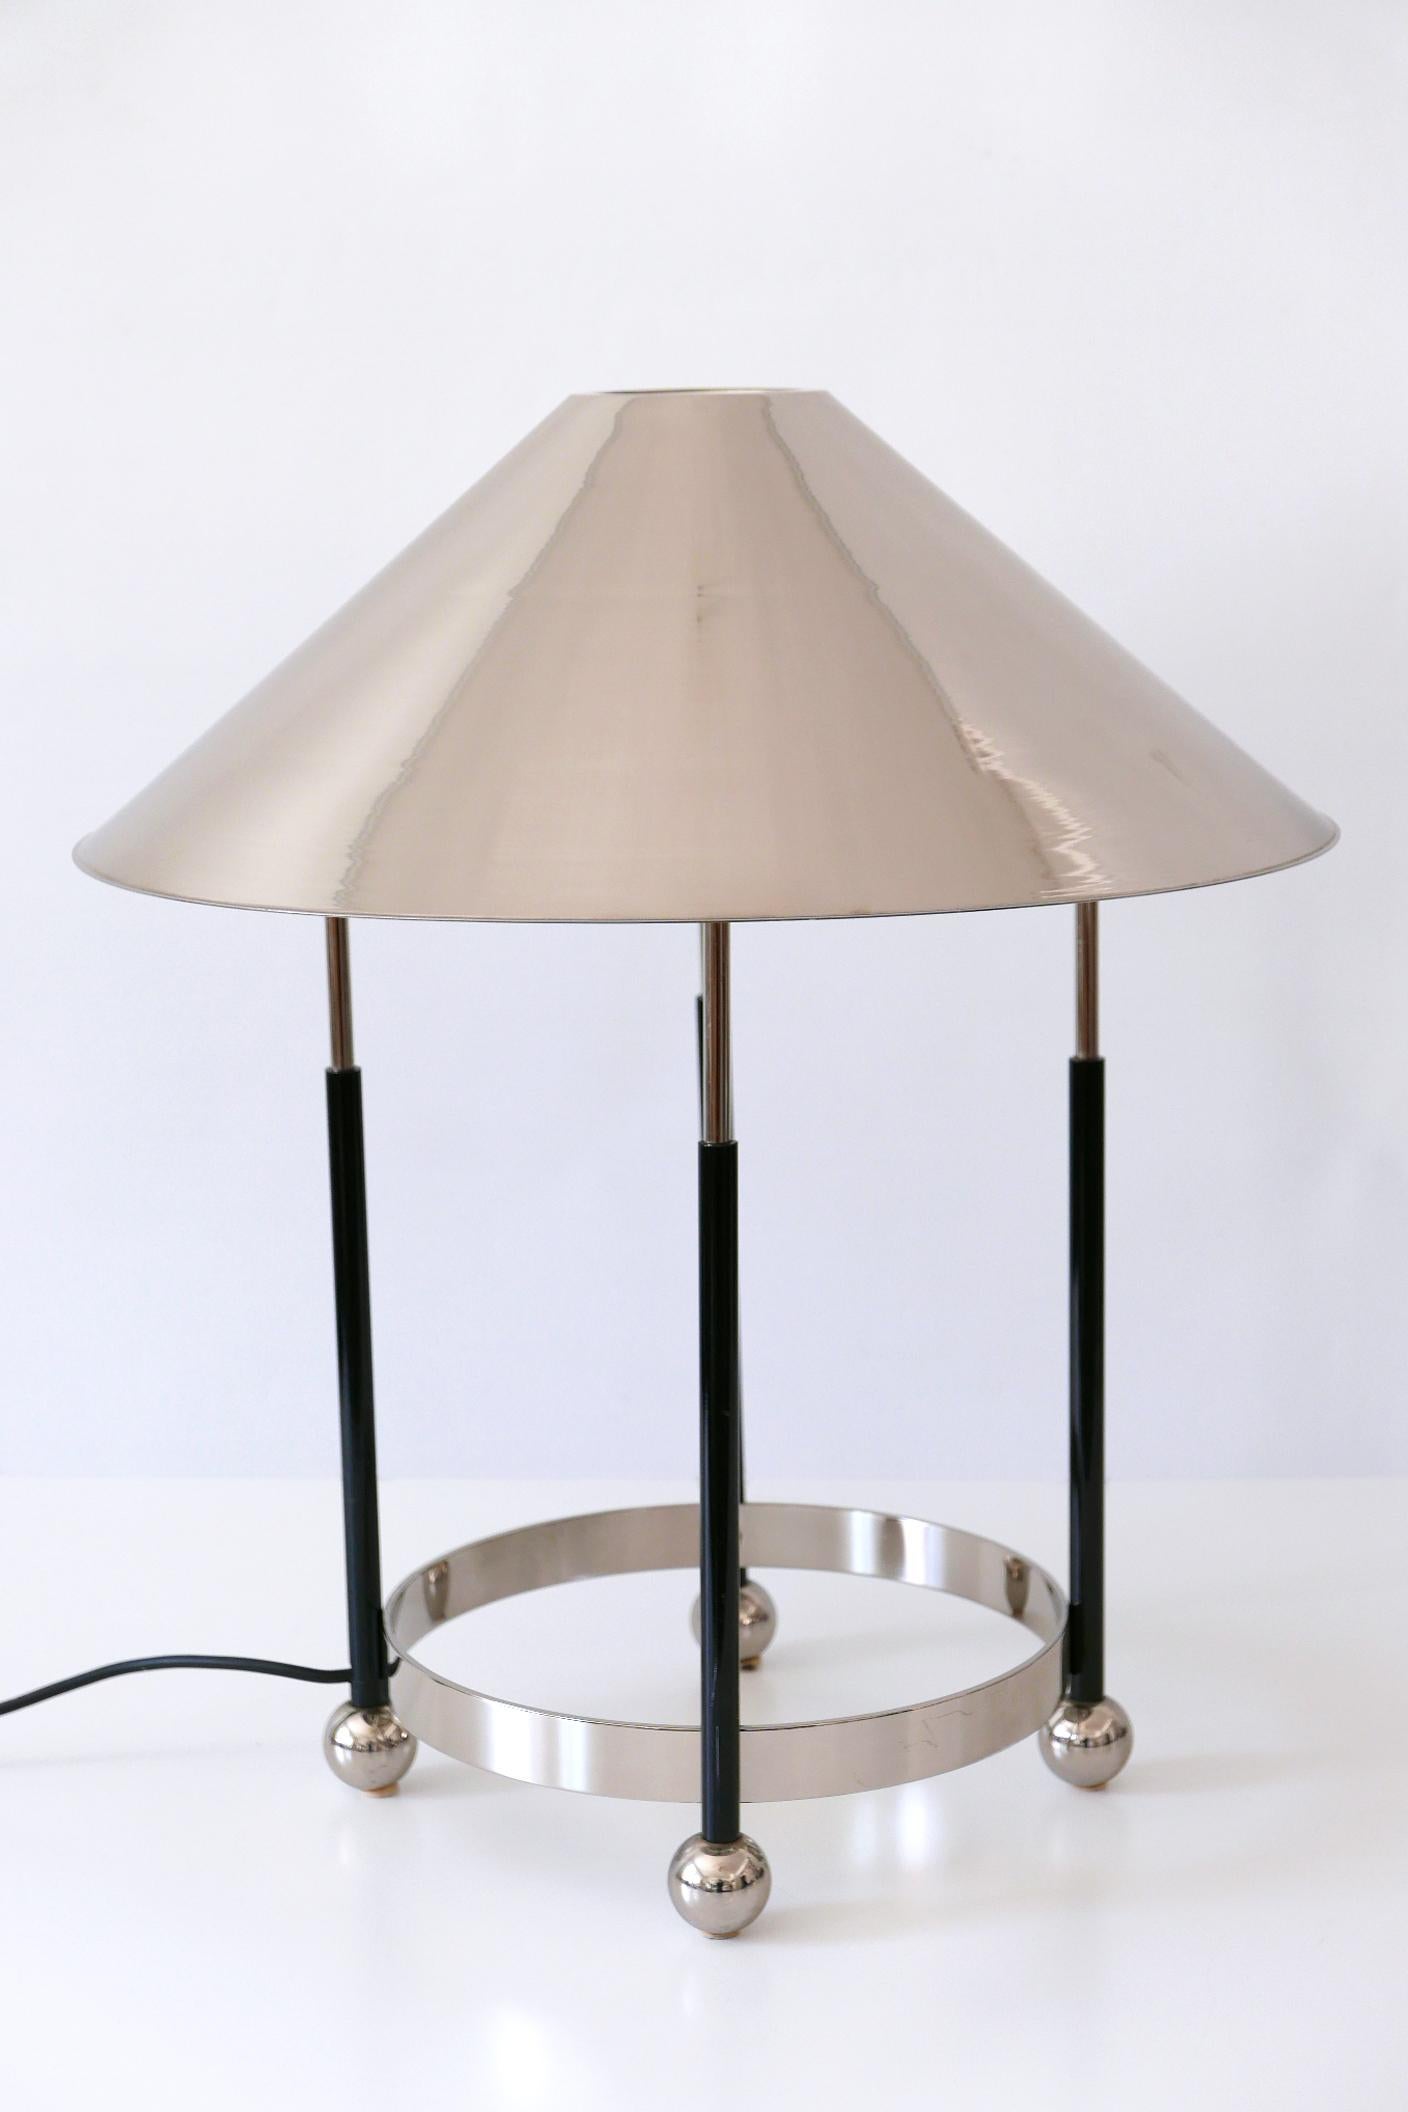 Monumental Mid-Century Modern Nickel-Plated Brass Table Lamp 1970s, Germany For Sale 4